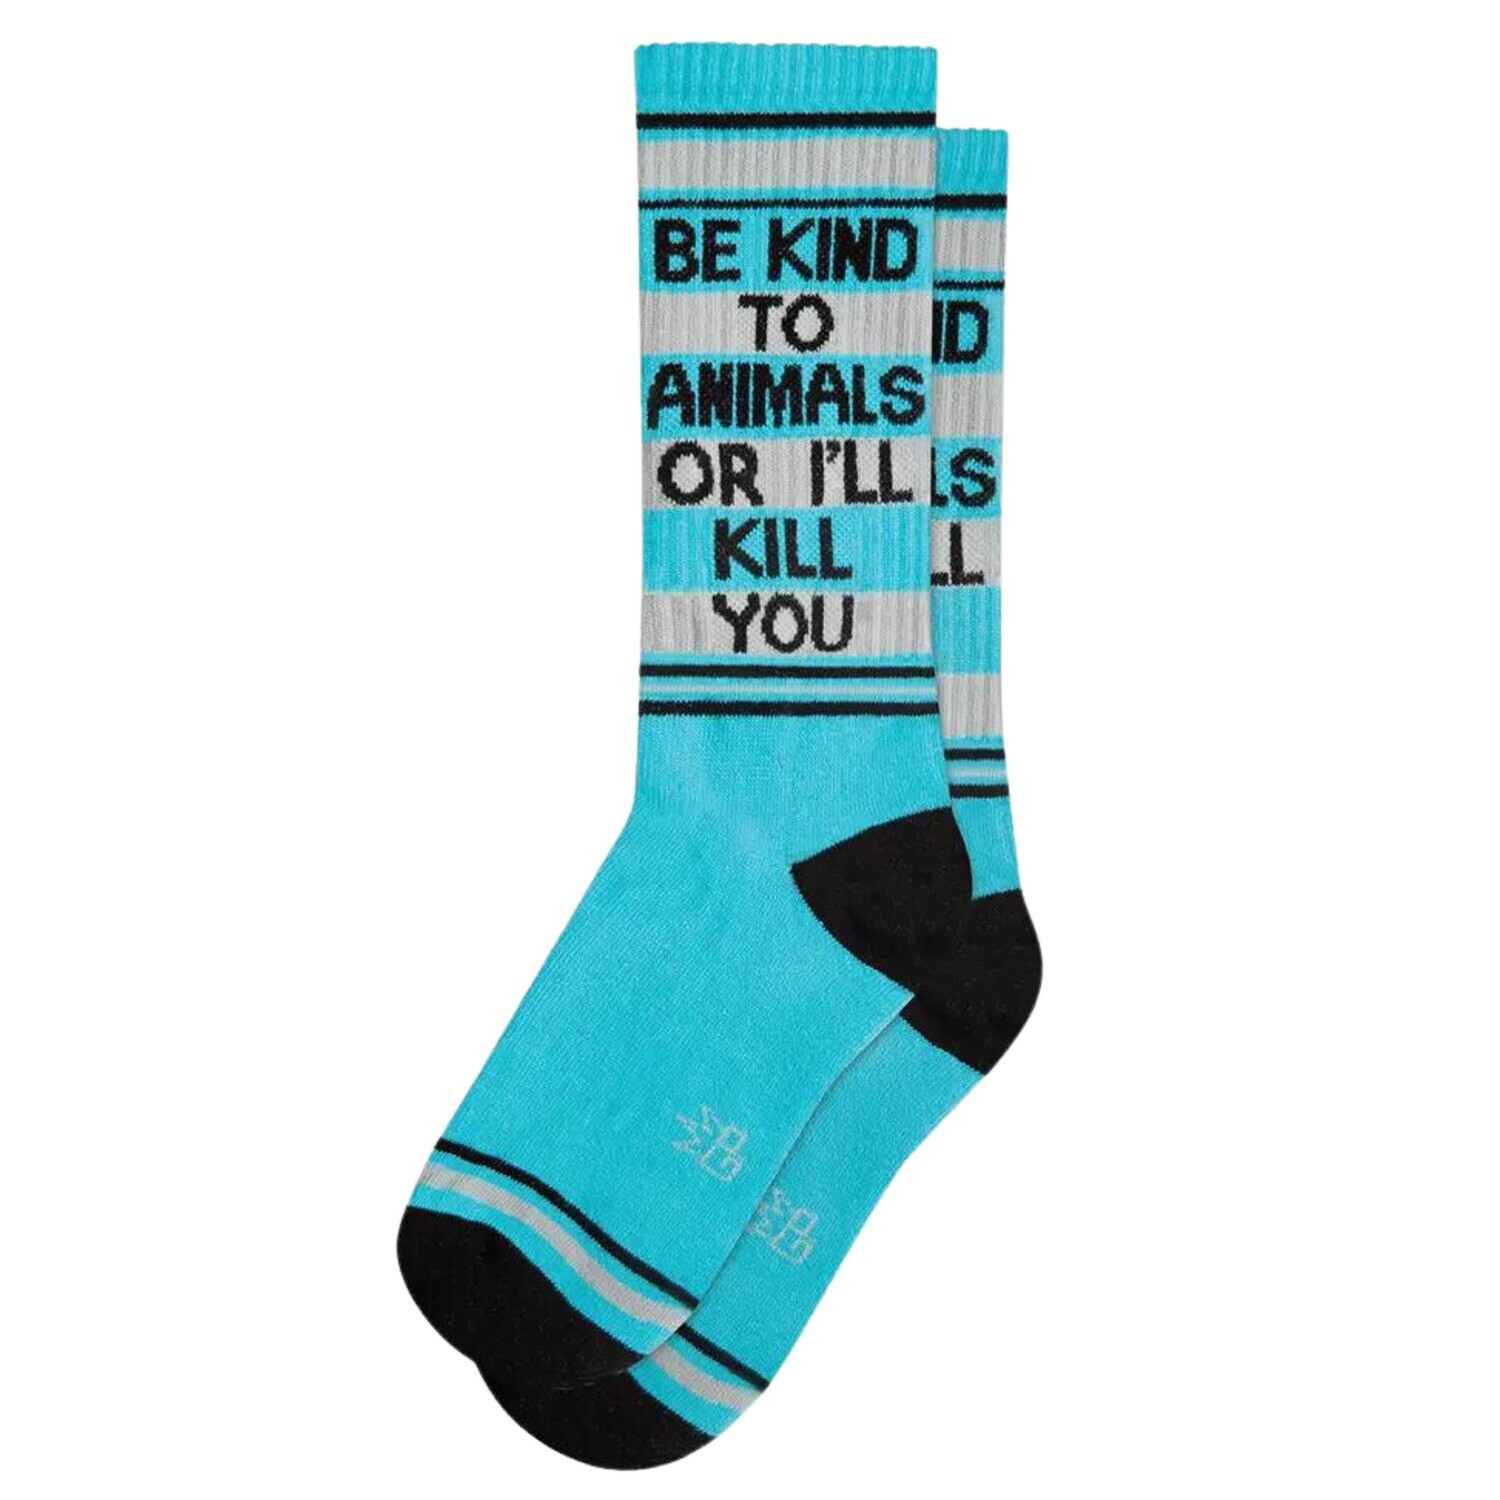 BE KIND TO ANIMALS SOCK